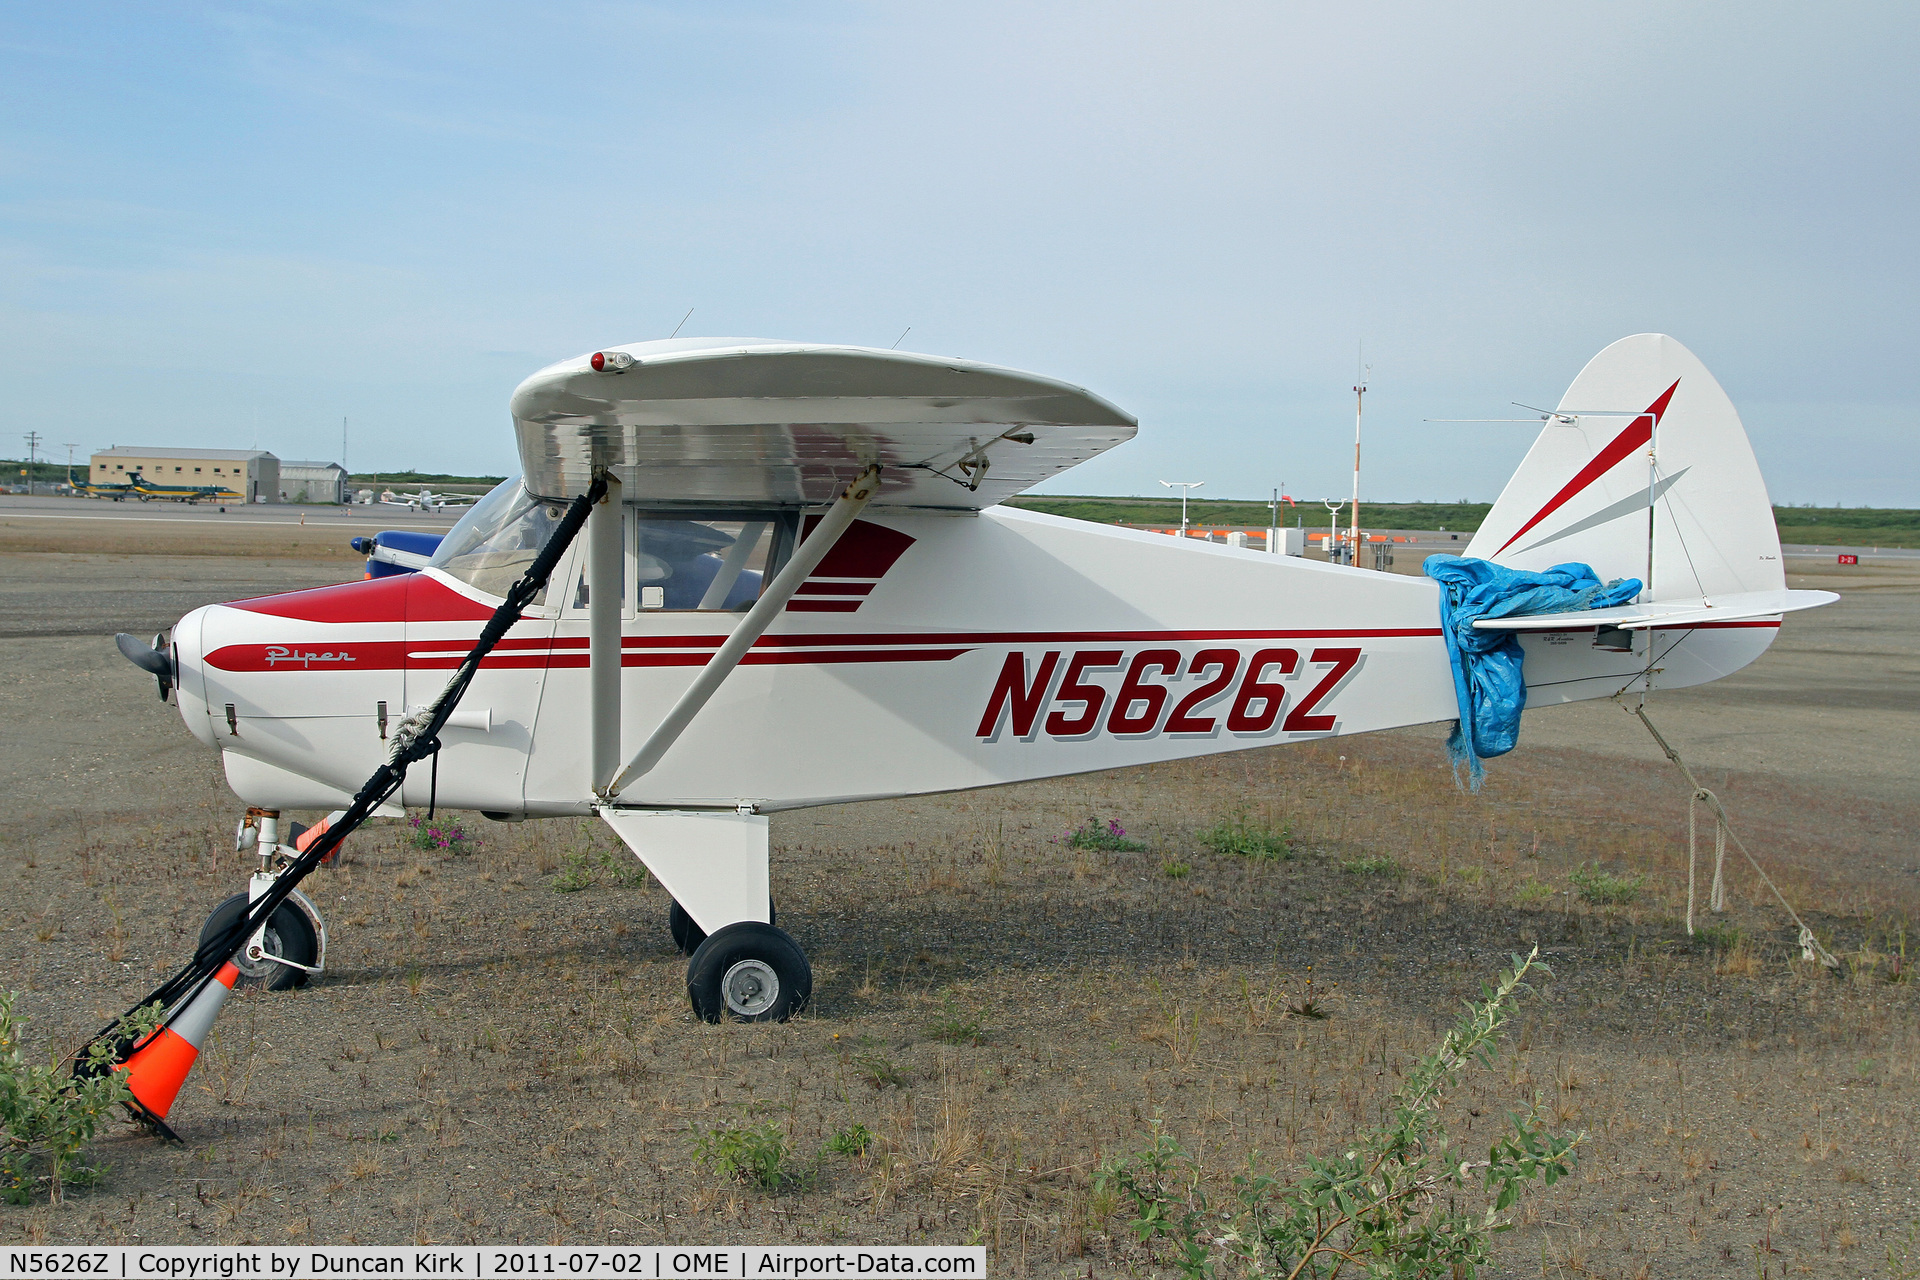 N5626Z, 1962 Piper PA-22-108 Colt C/N 22-9438, Gold is the name of the game in Nome